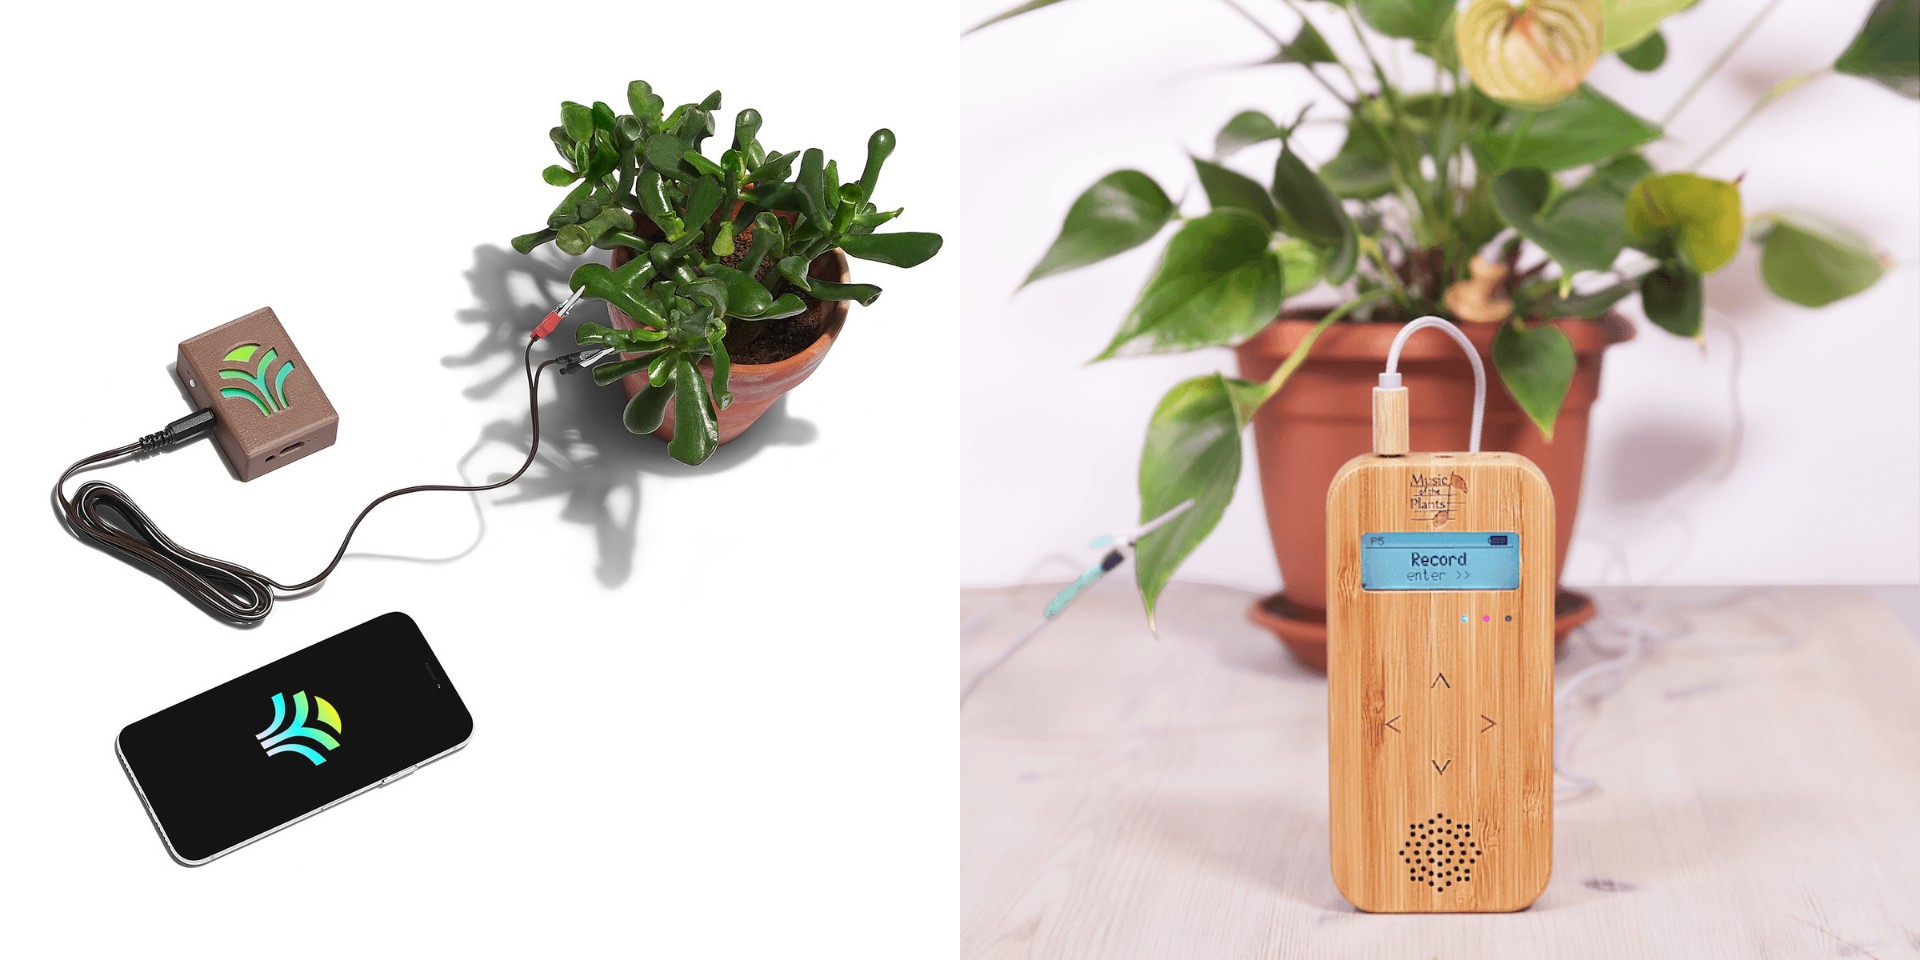 Tune in to nature by listening to music generated from your plants